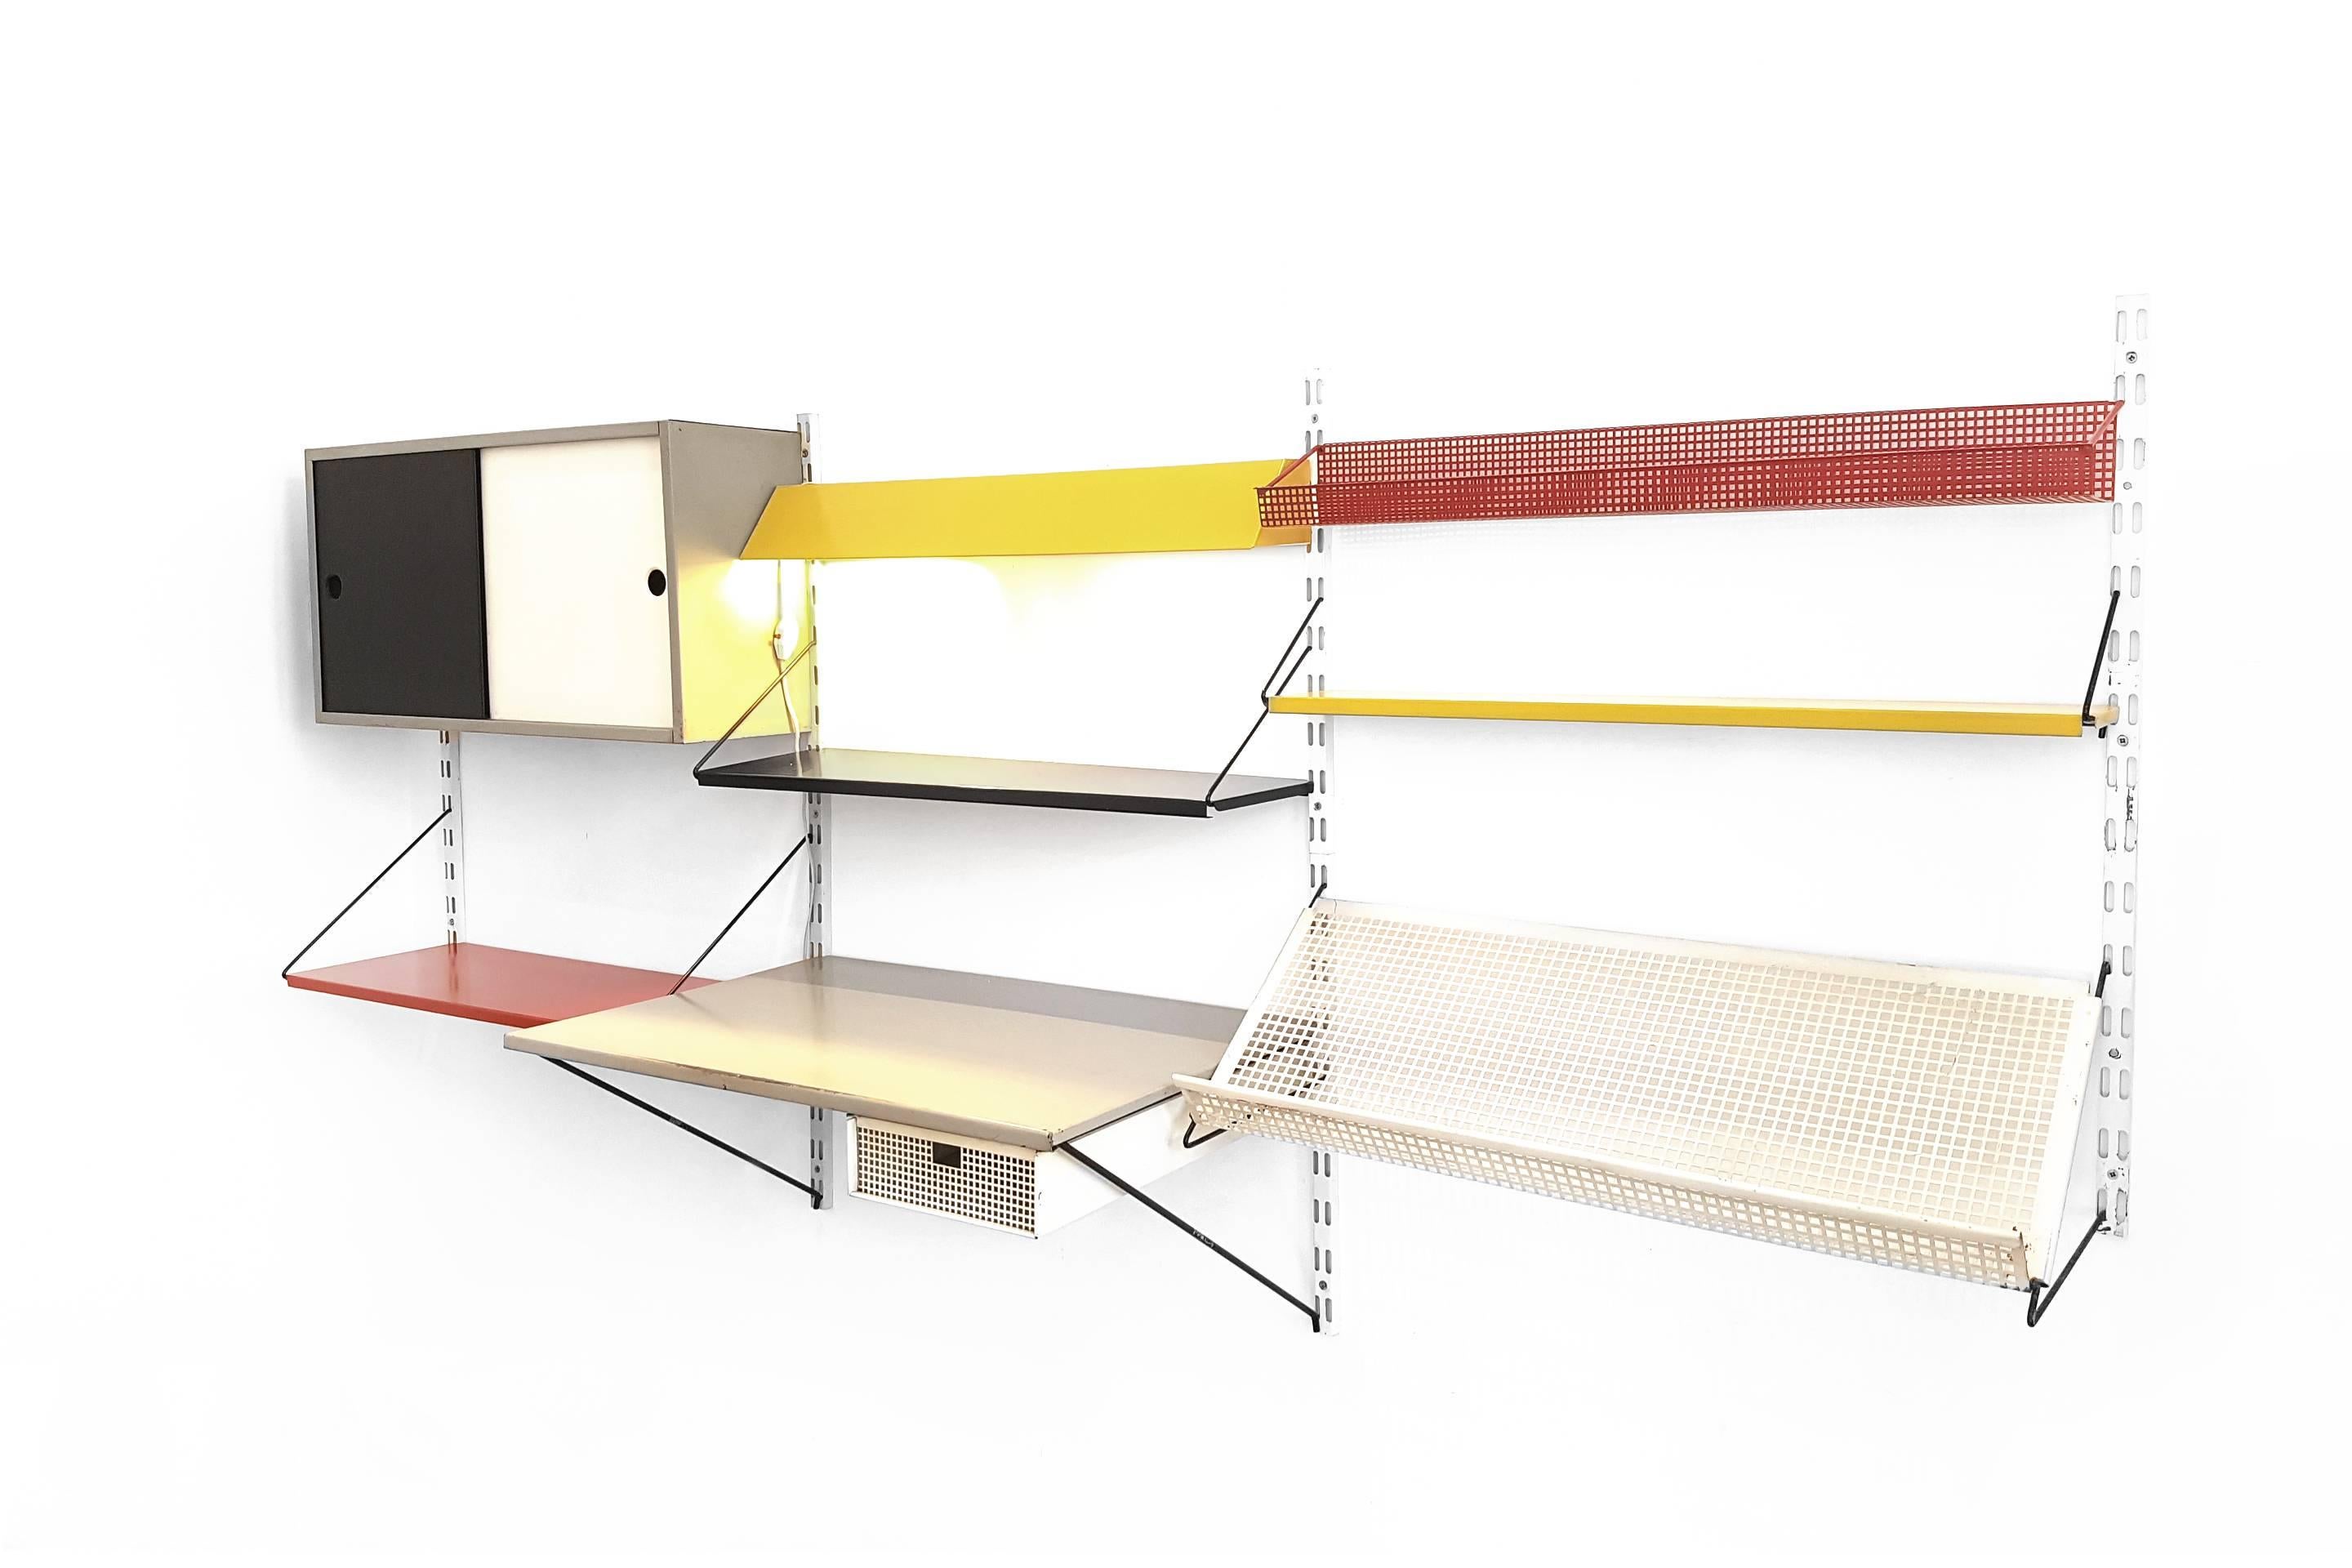 Beautiful Industrial Dutch wall system from the 1950s design by Tjerk Reijenga for the Dutch manufacturer Pilastro.
Very nice piece of Dutch modernist design. This metal wall rack consists of five white metal stands, five shelves in red, yellow